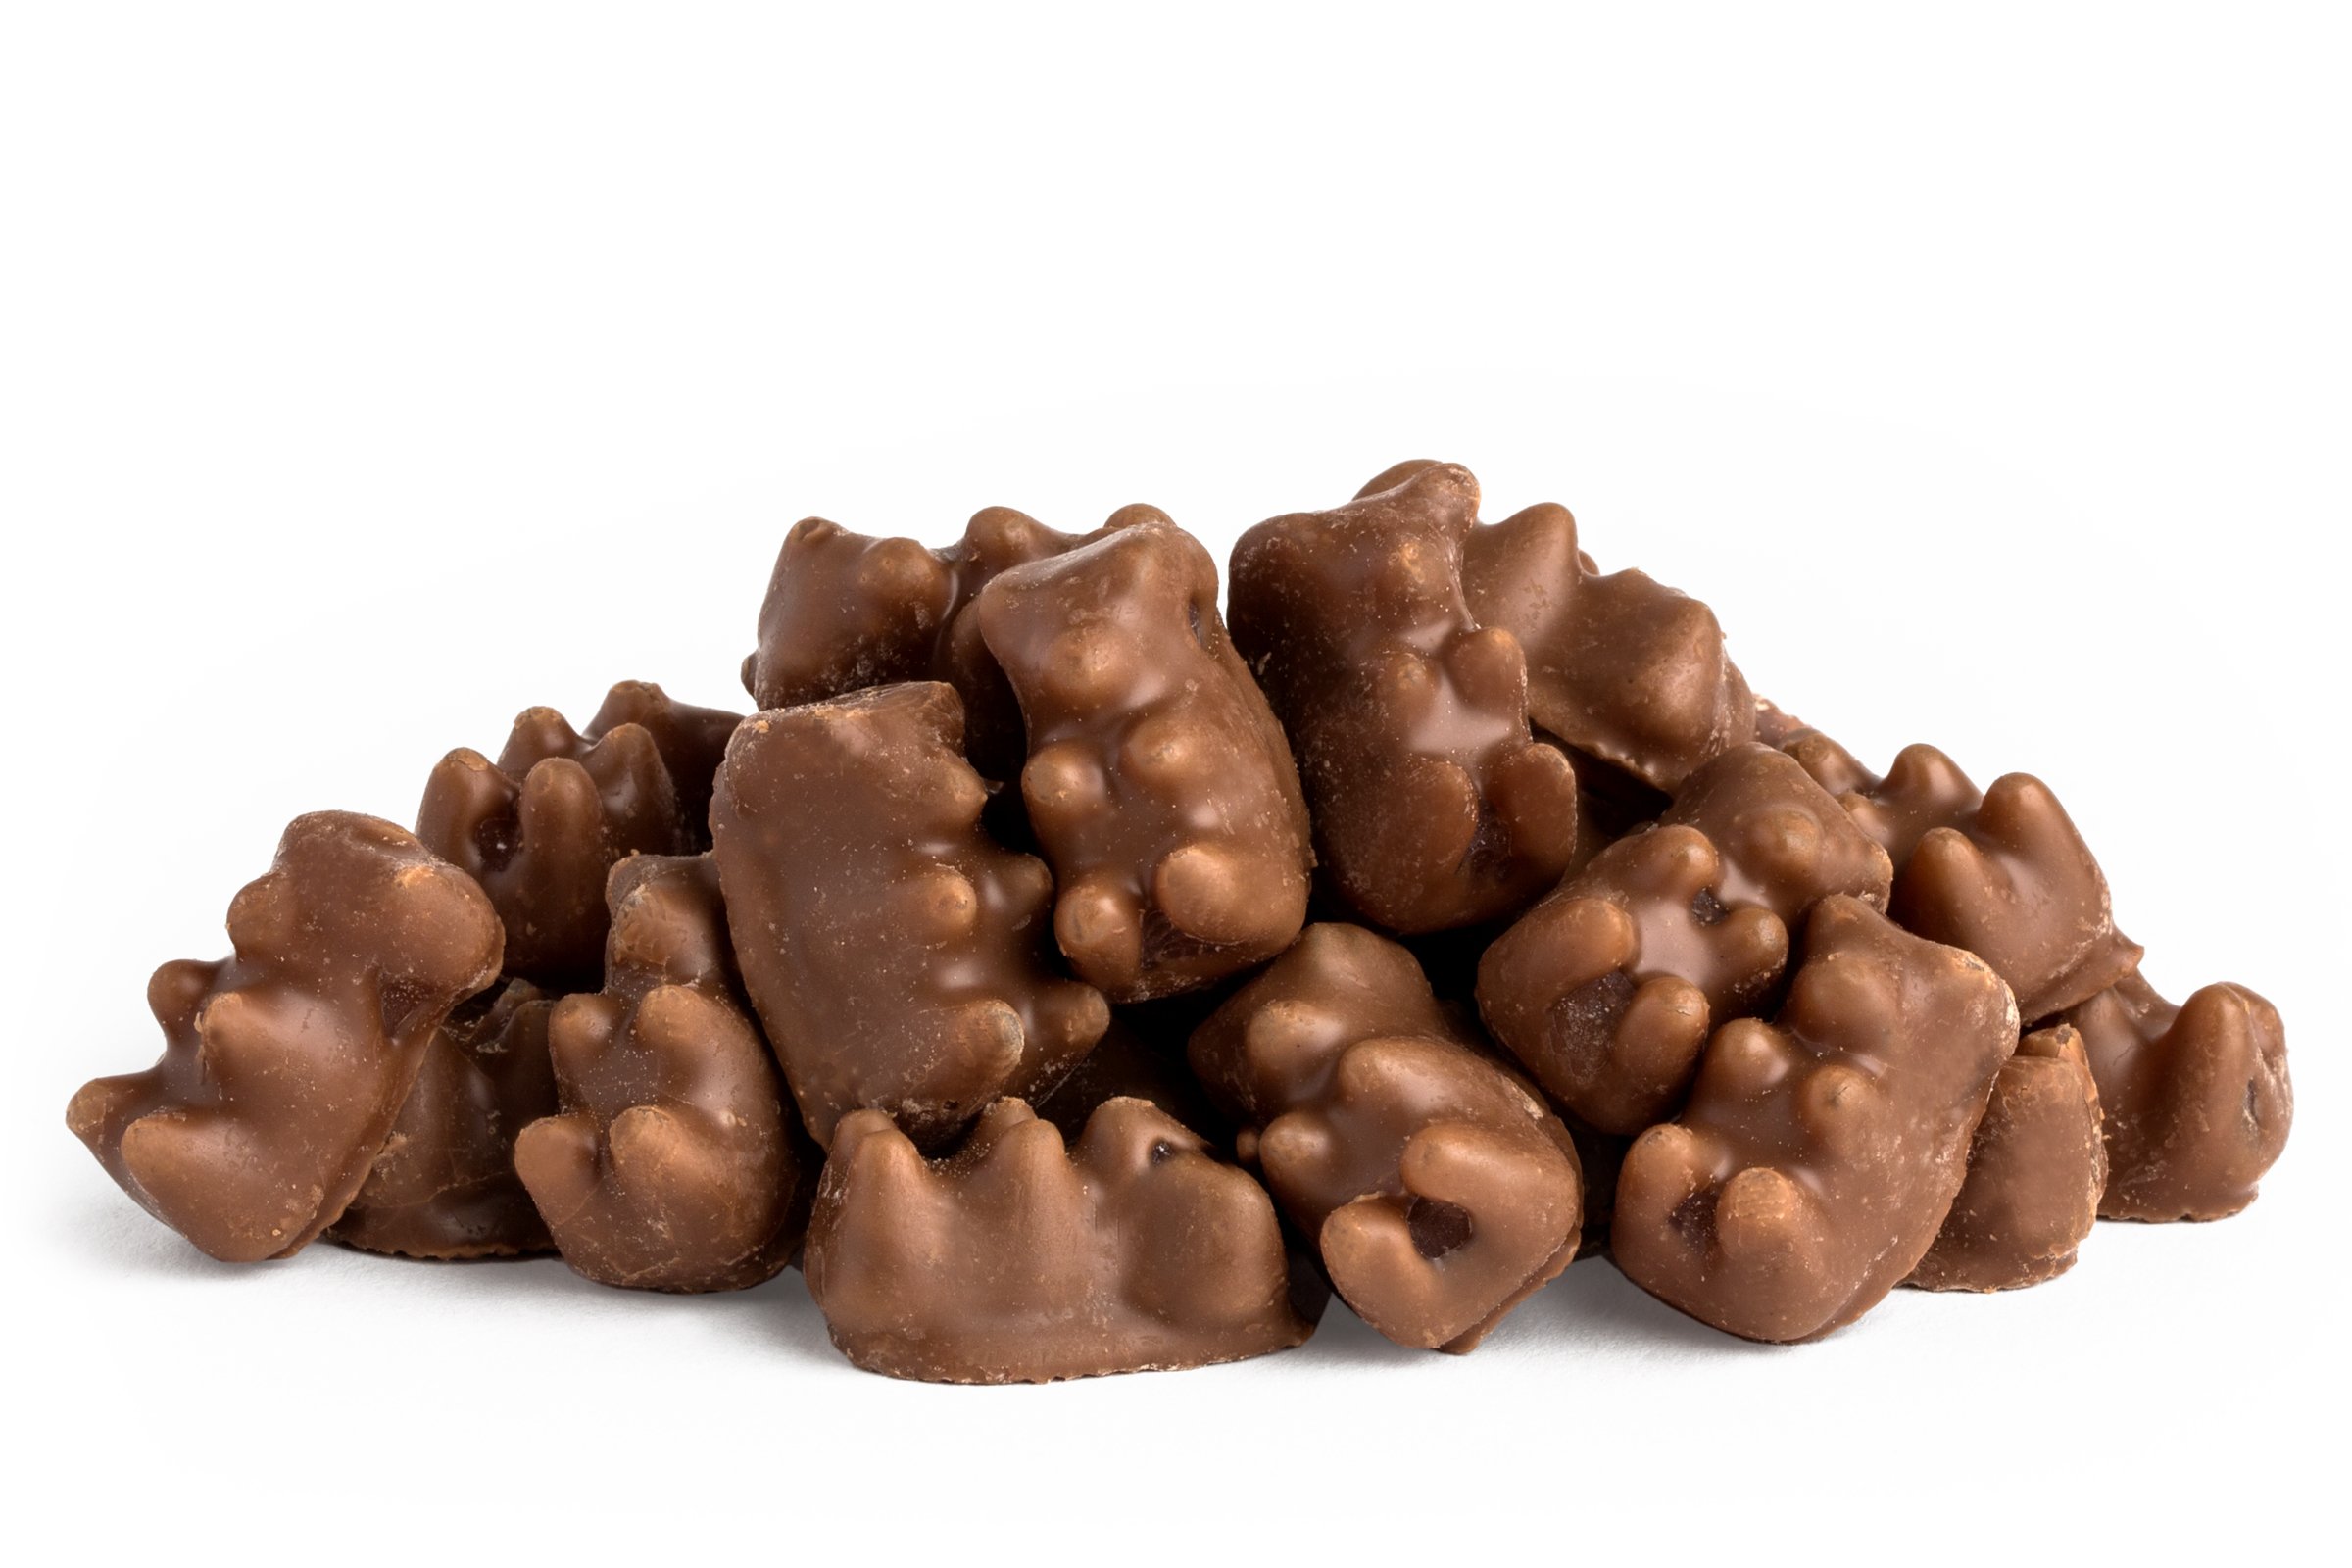 Buy Pretzel Milk Chocolate M&M's Candy from NutsinBulk, Nuts in Bulk  Official Store Since 1929